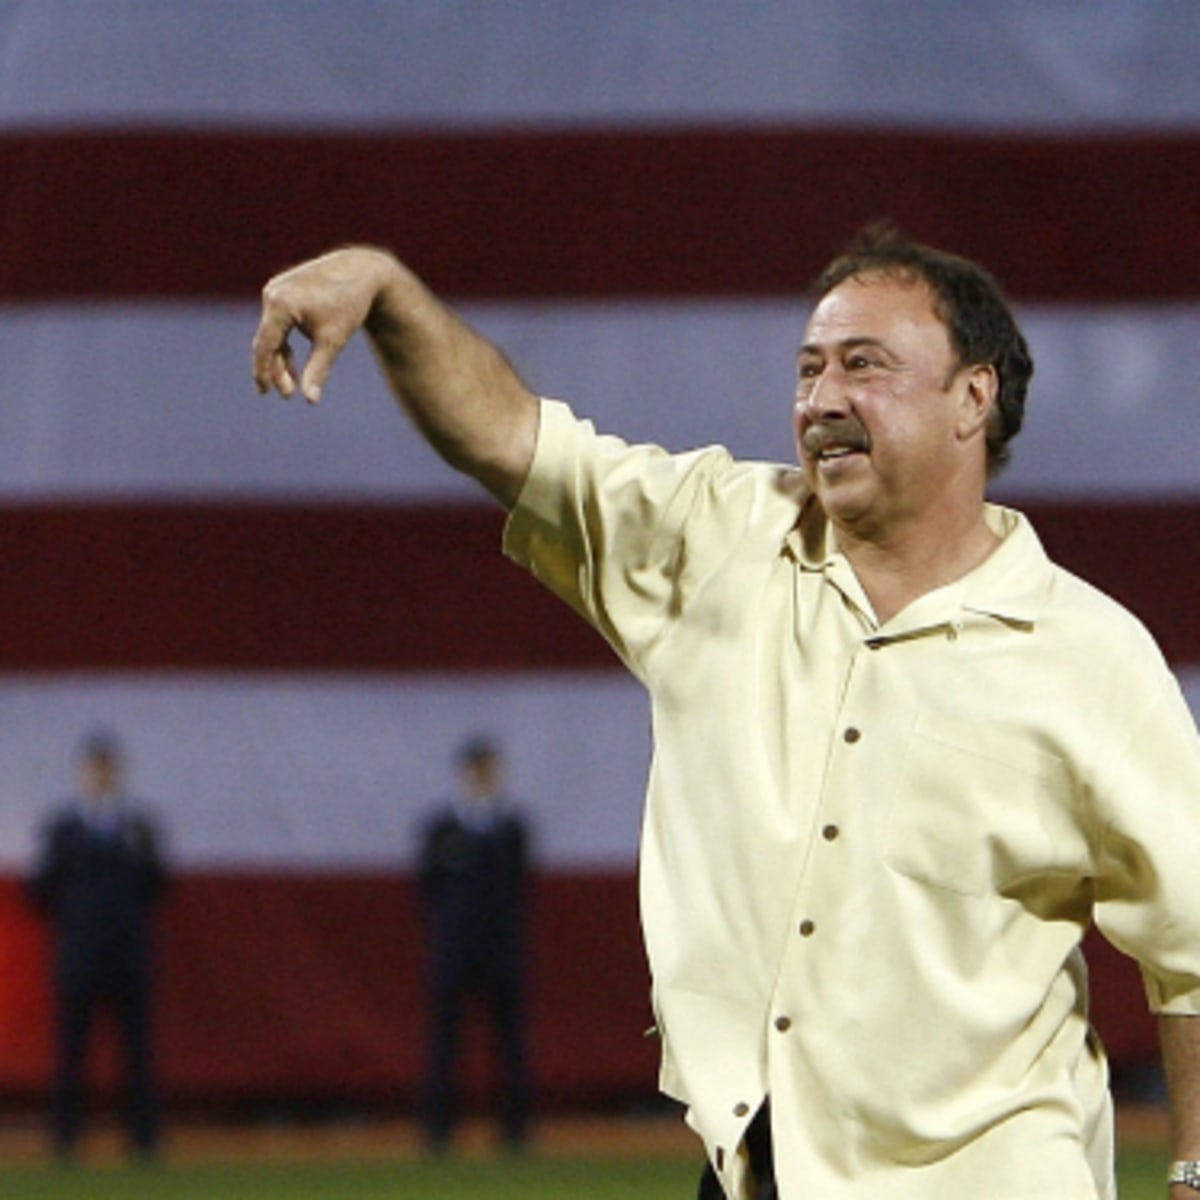 Jerry Remy, MLB player and Boston Red Sox announcer, has died at